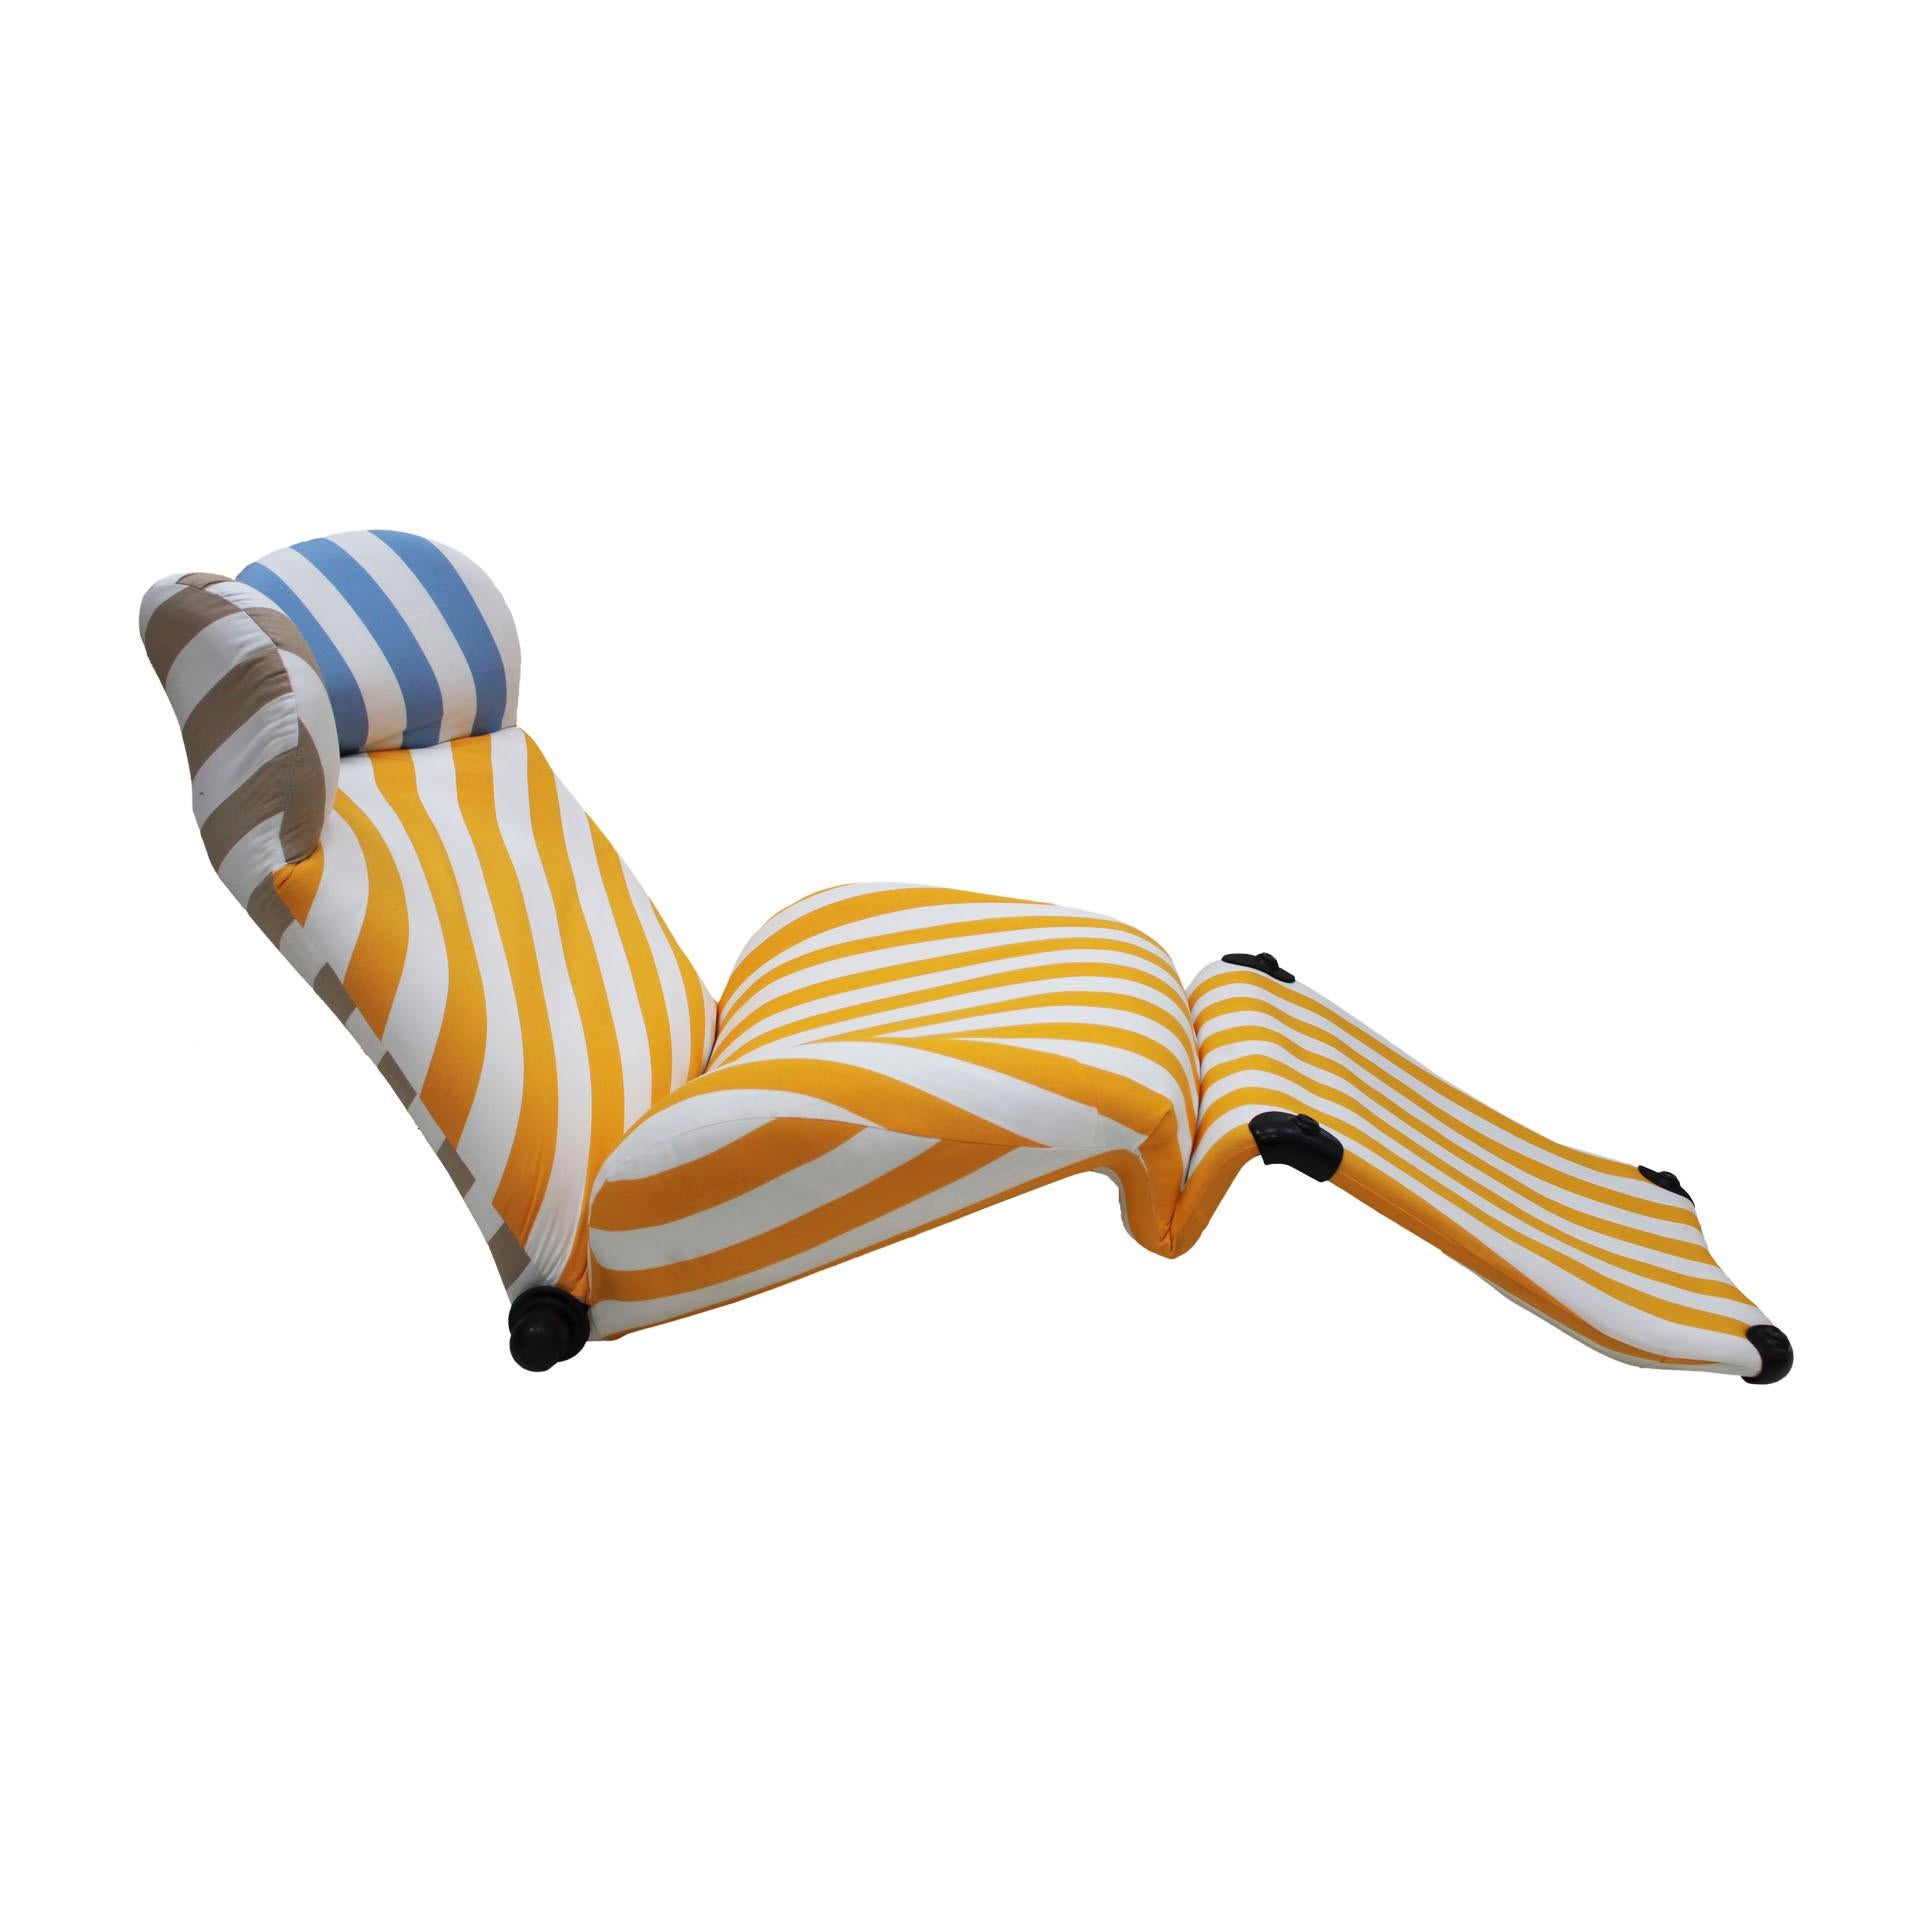 Armchair - Chaise longue mod. Wink 111 designed by Toshiyuki Kita in the 80's and edited by Cassina. Structure made in steel and upholstered in cotton fabric with striped pattern in different tones. Adjustable ear/headrest and footrest. Italy